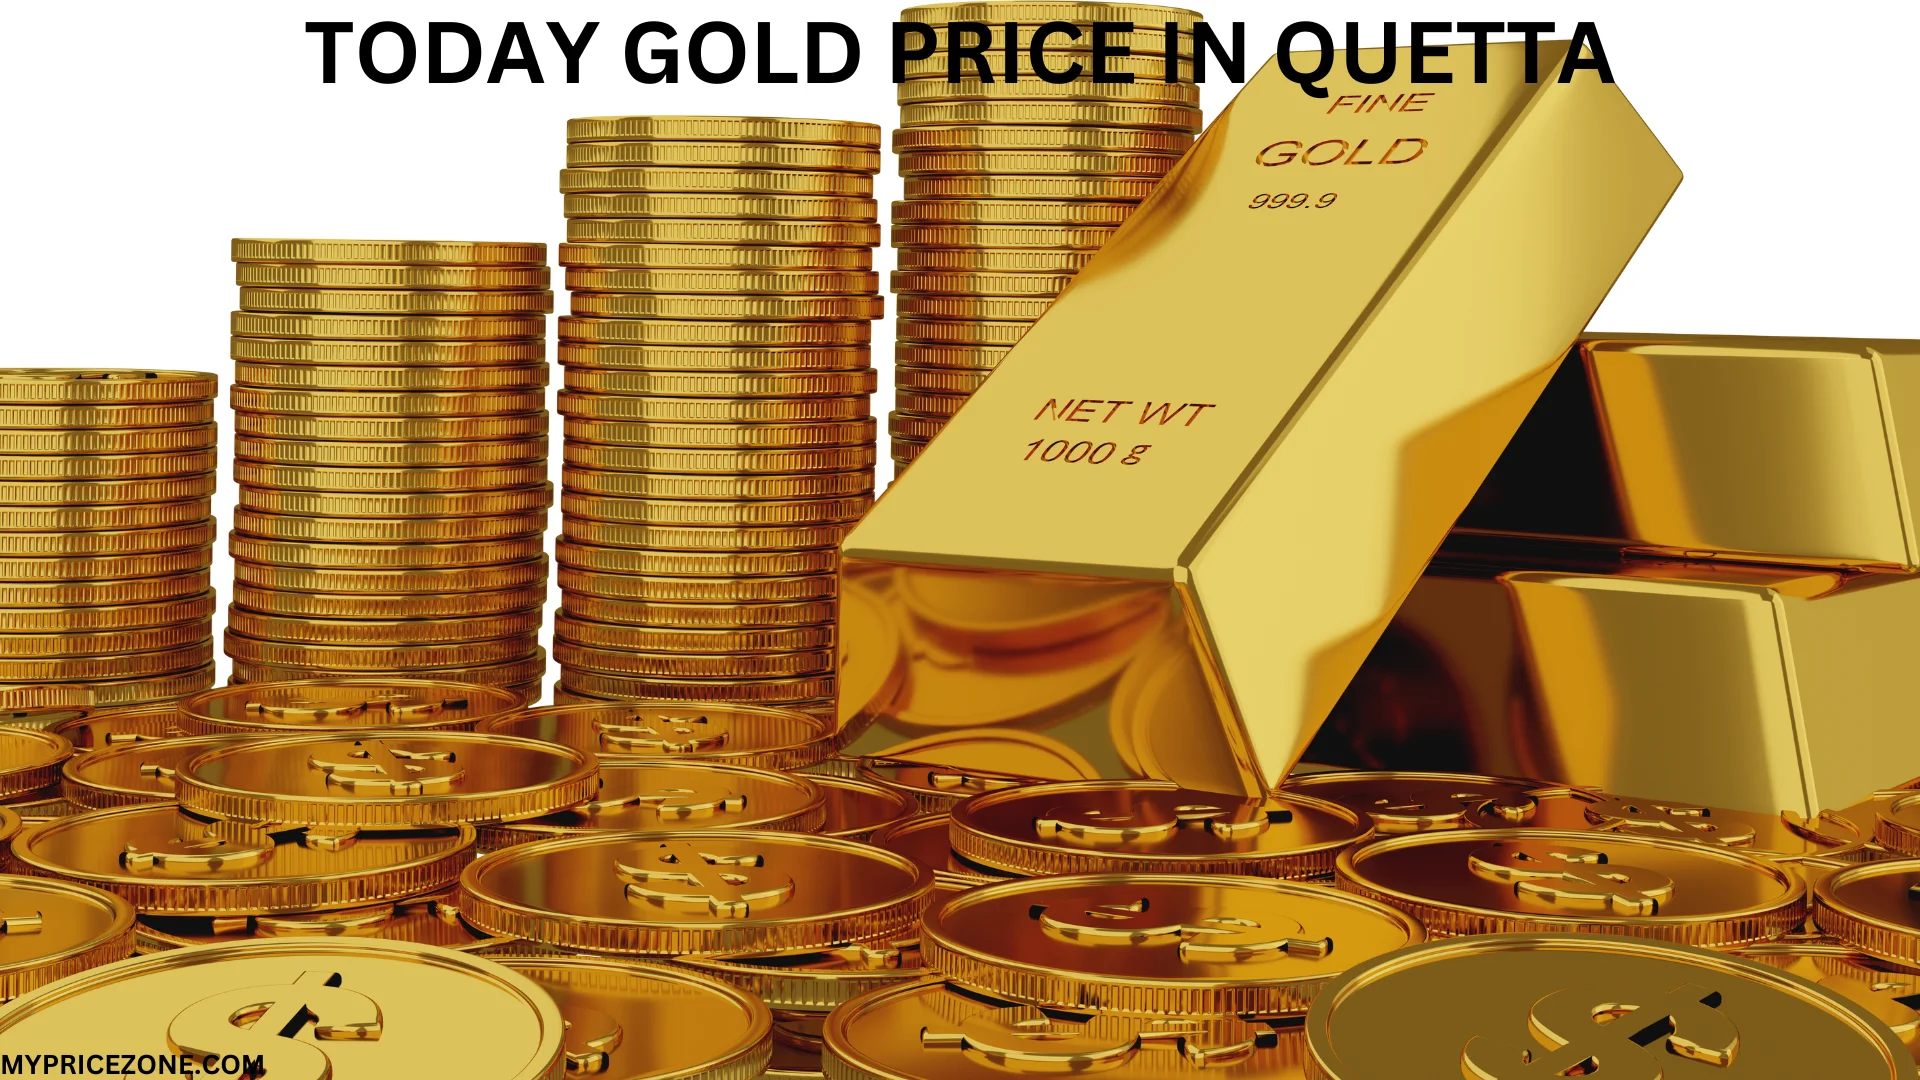 gold coins AND BARS with today gold price in Quetta